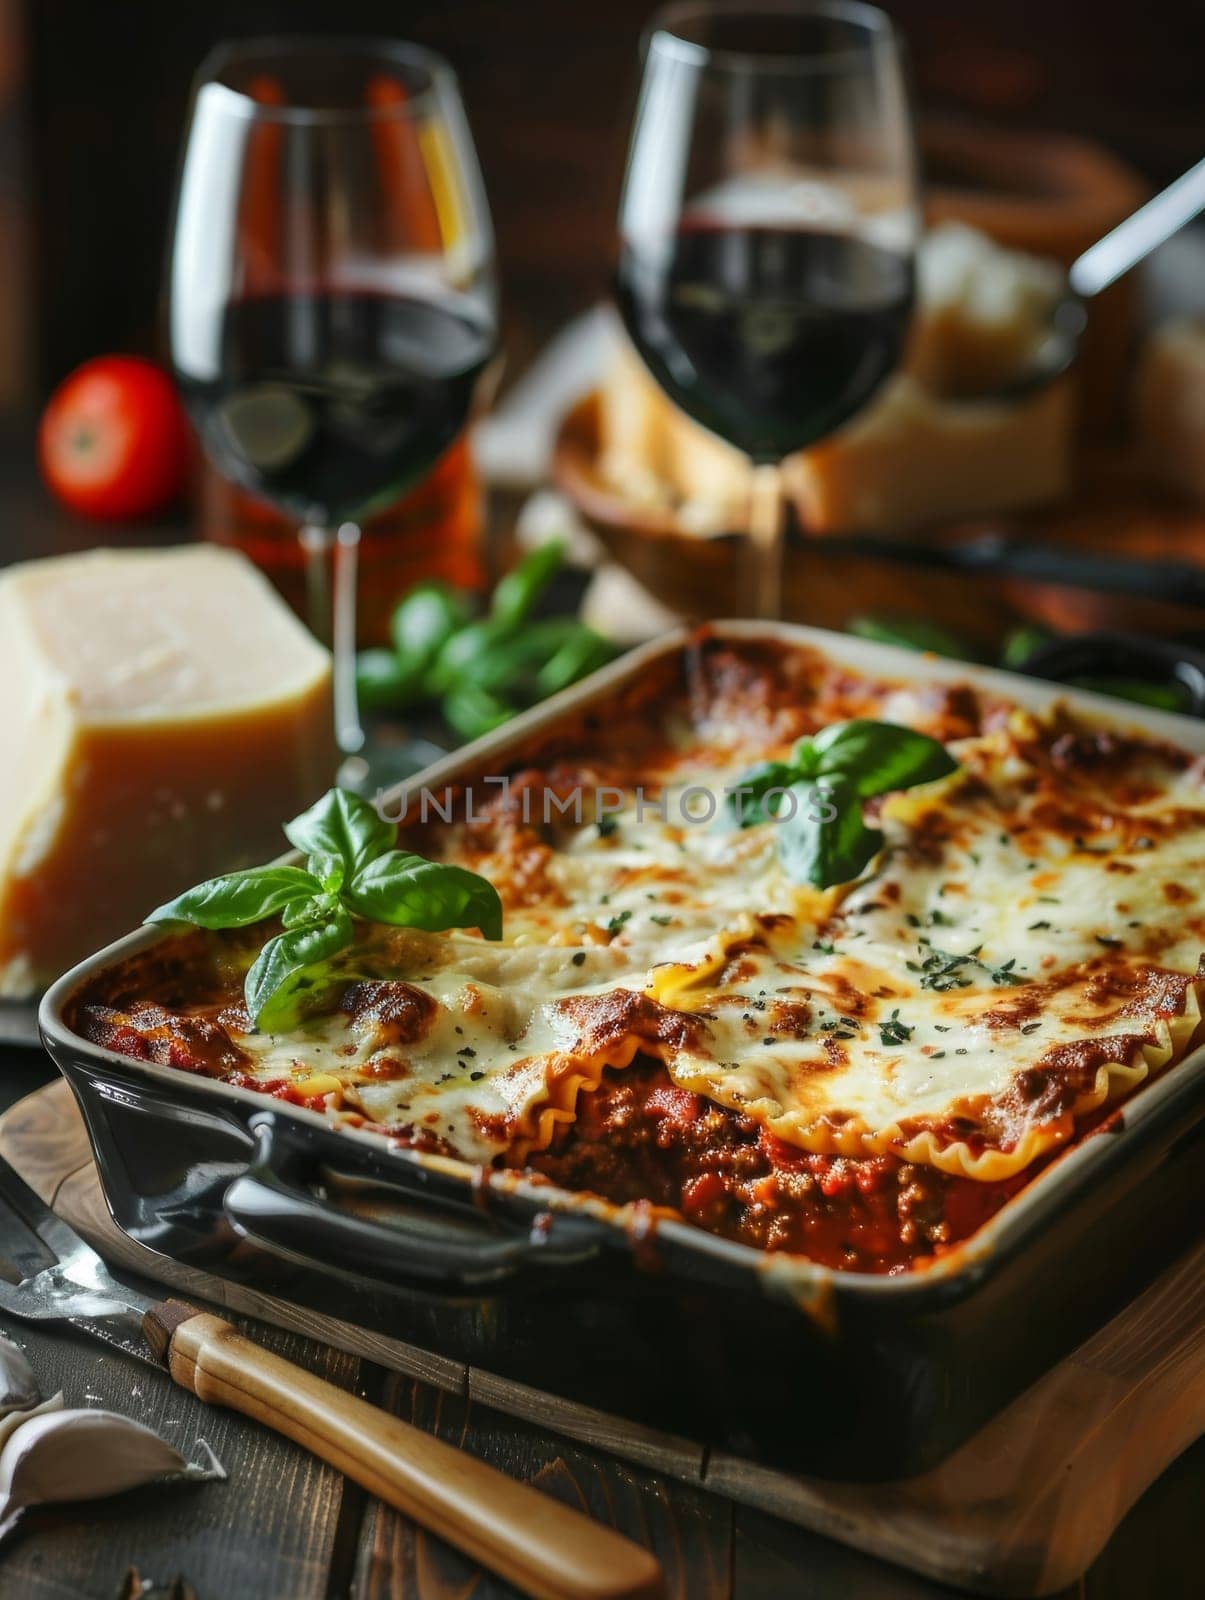 Italian lasagna with layers of pasta, ricotta, meat sauce, and melted mozzarella cheese. A classic Italian casserole dish, rich and flavorful